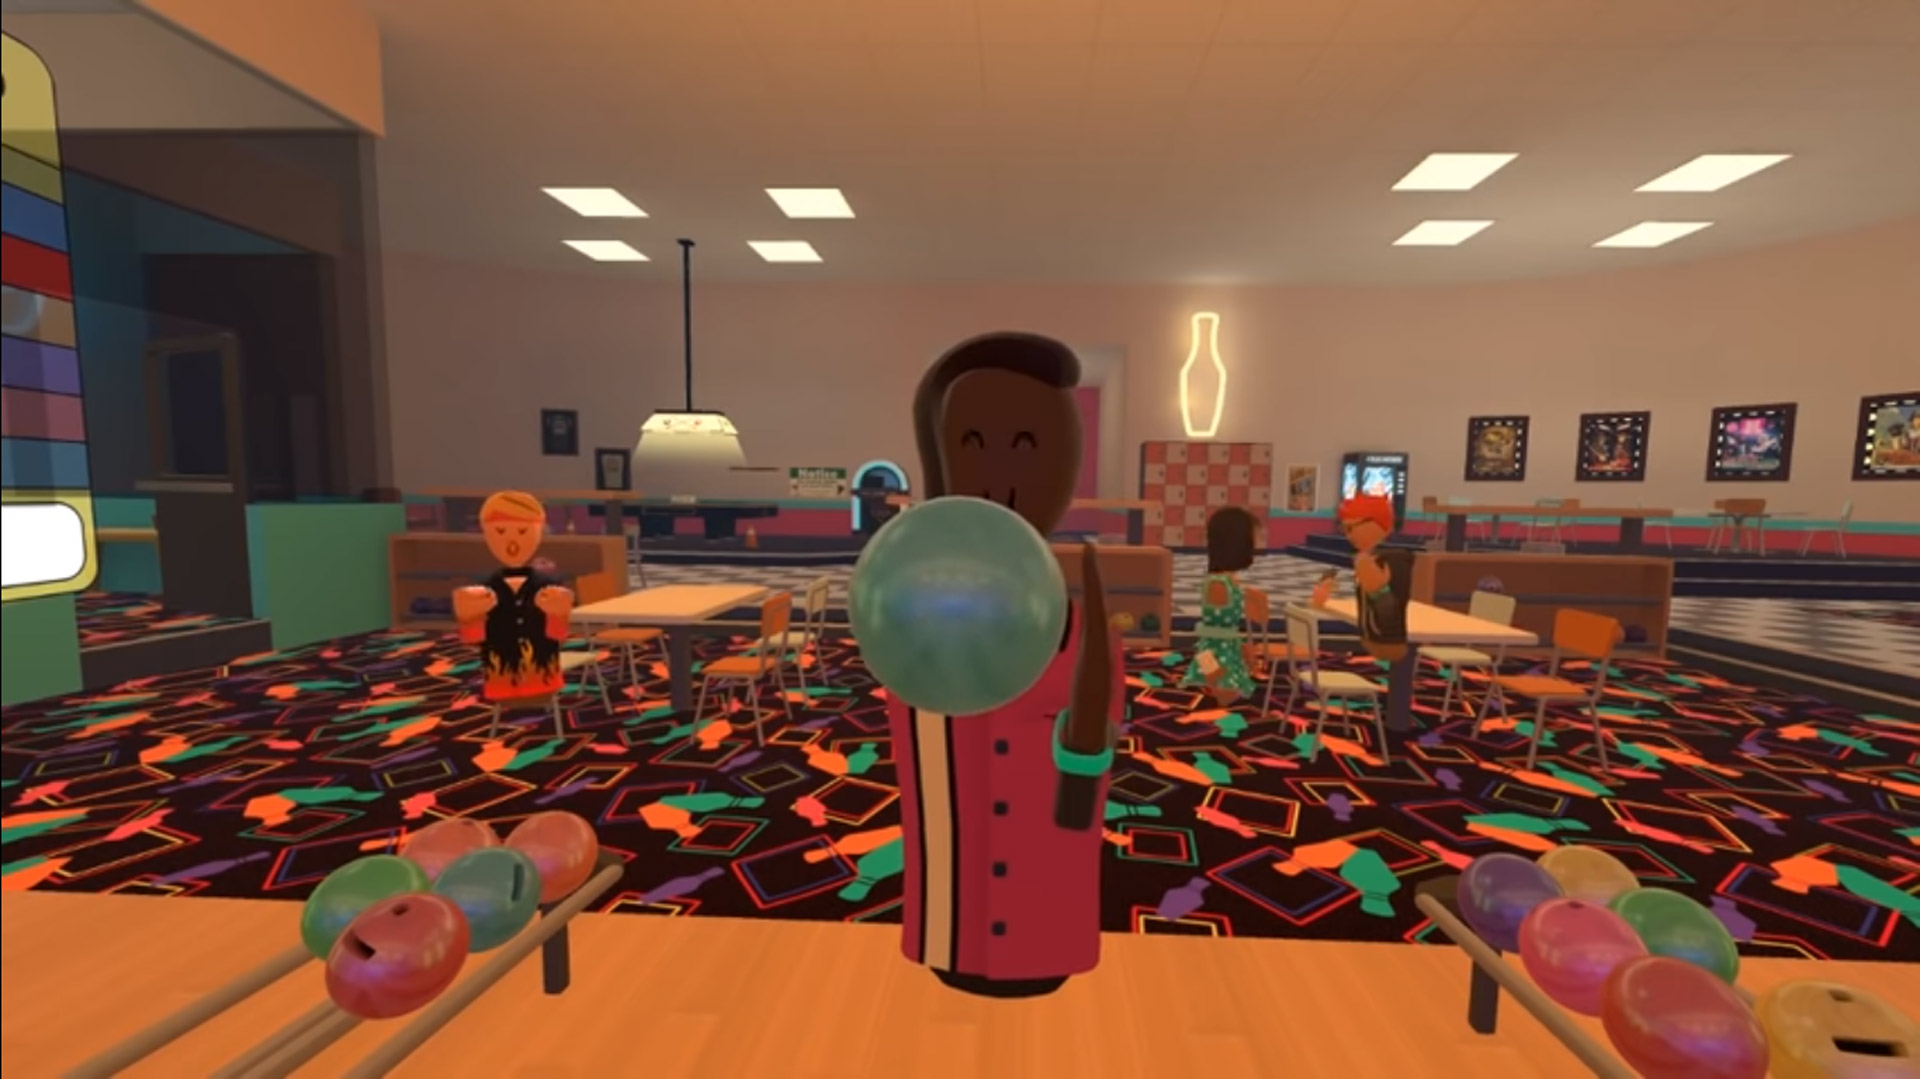 Rec Room' Update Brings Multiplayer Bowling to Social VR App – Road to VR